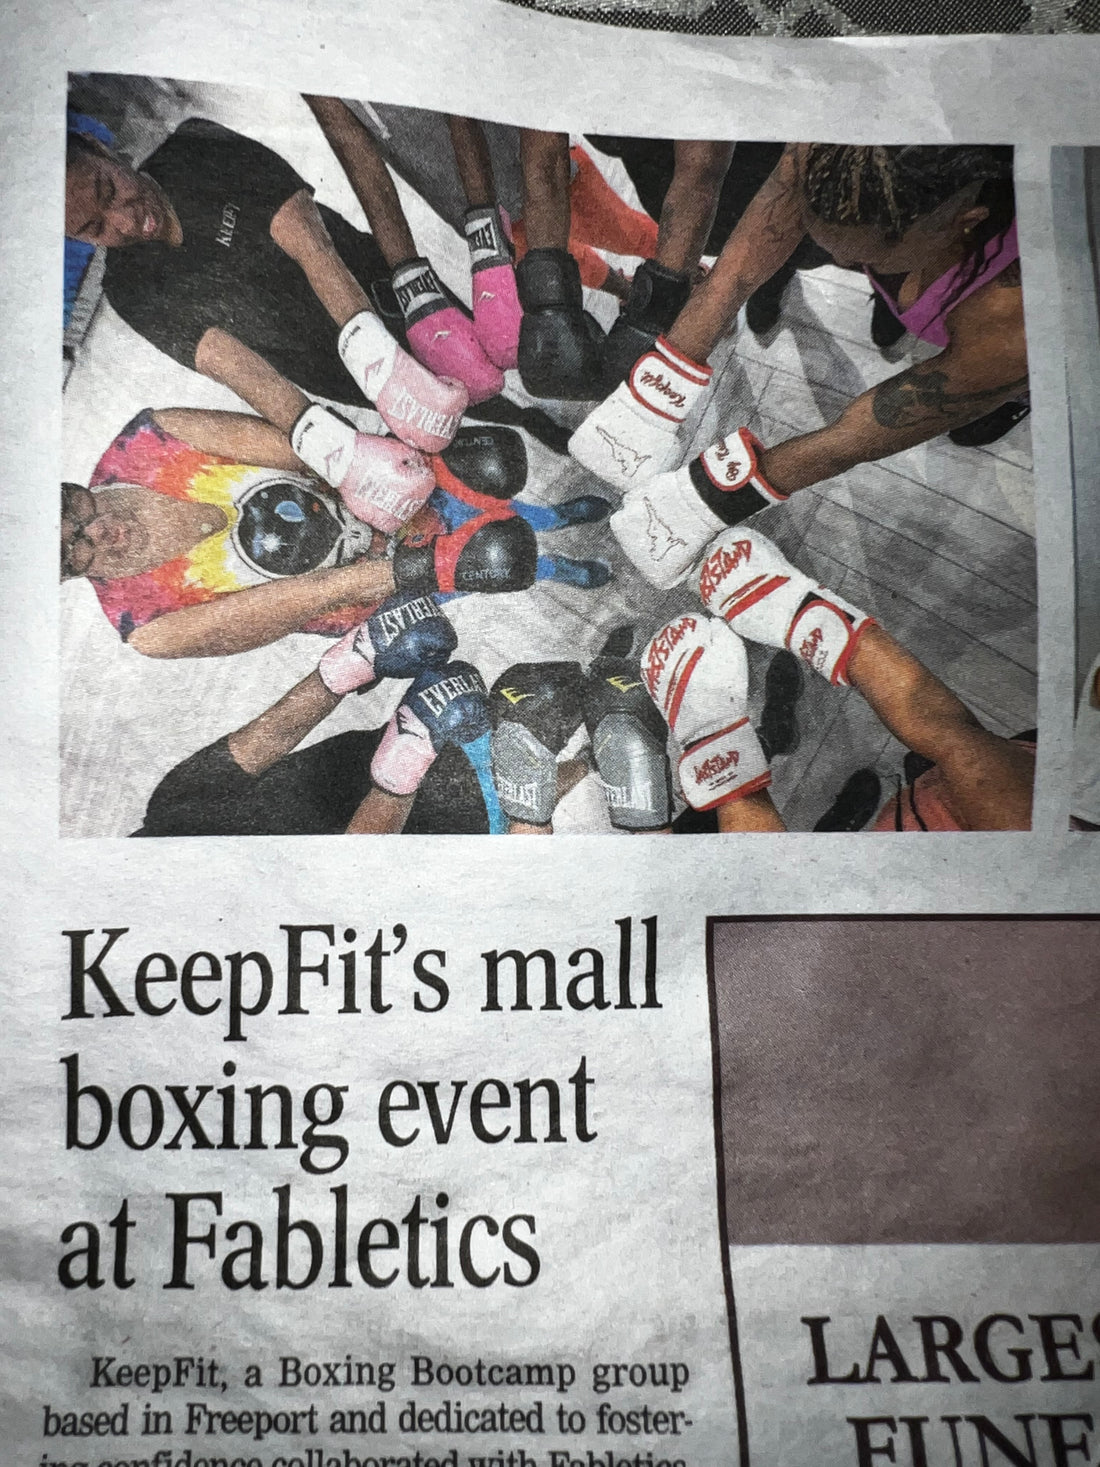 KeepFit X Fabletics event on the Freeport Herald Leader